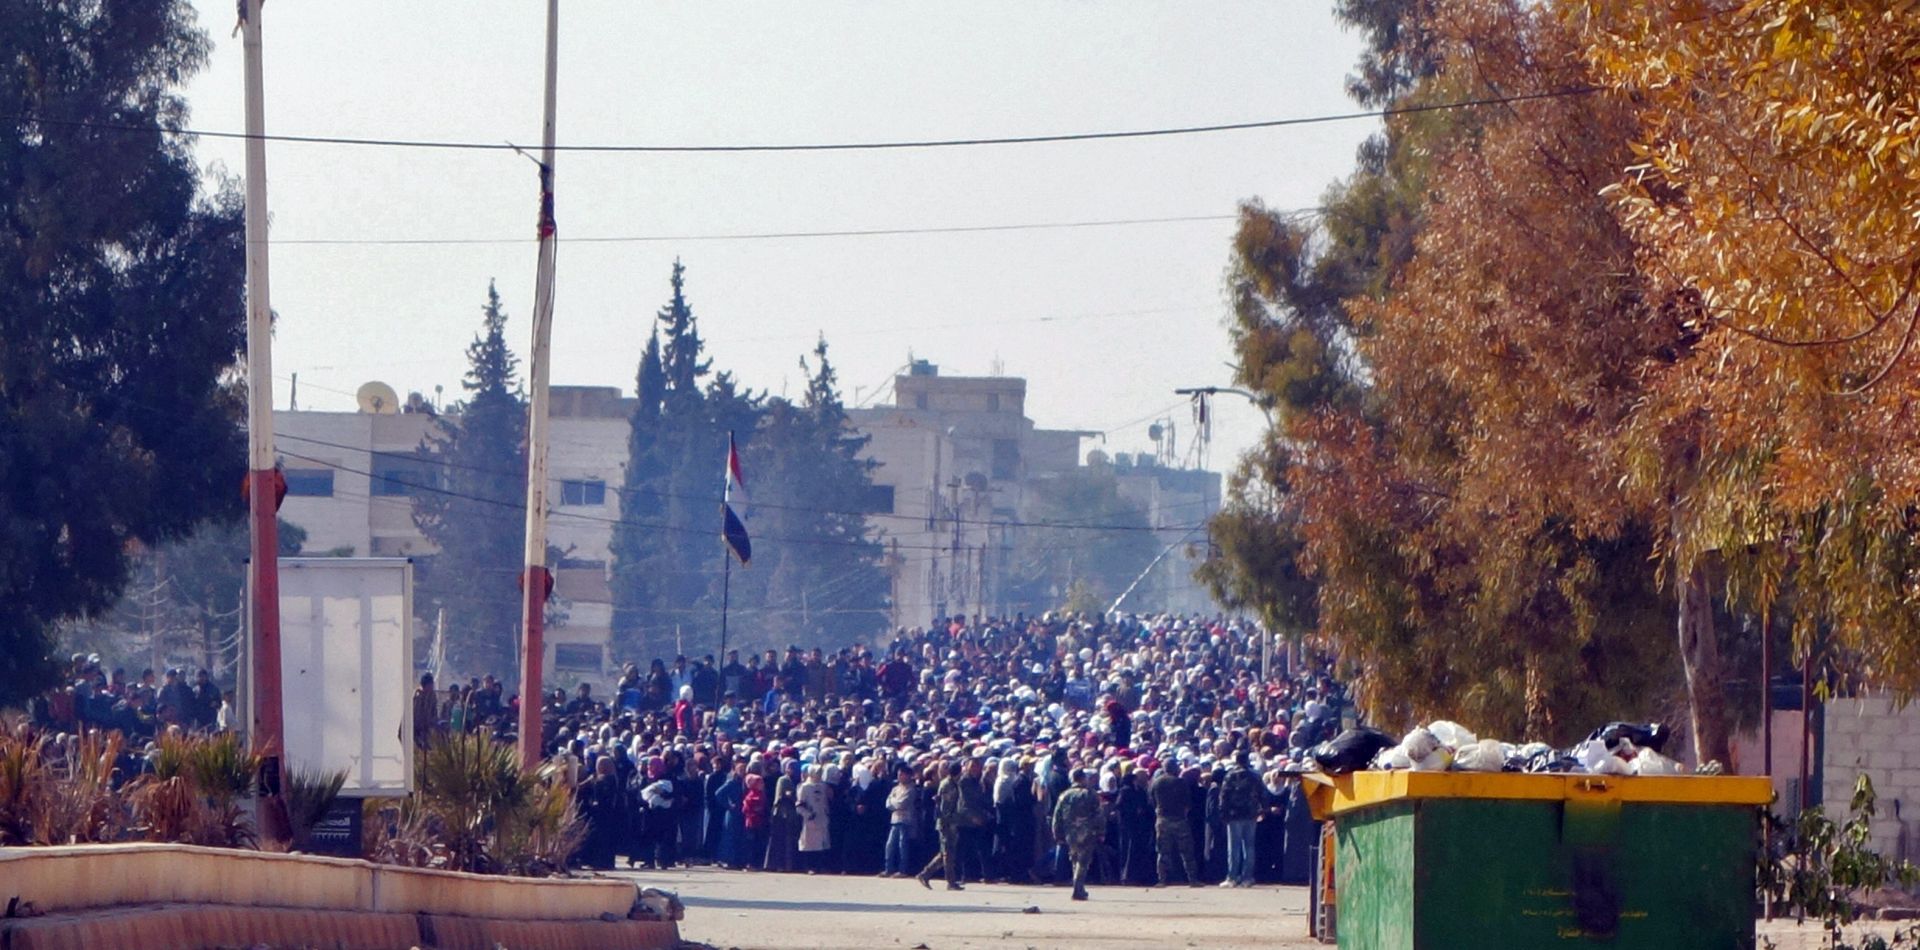 epa05142737 A handout photo dated 03 February 2016 and made available 04 February 2016 by International Committee of the Red Cross, ICRC, showing a crowd of people waiting on the edge of a buffer zone that was created in preparation for a food aid distribution in the besieged town of Moadamiyeh, Syria. The aid distribution  was a joint operation between the Syrian Arab Red Crescent (SARC) and the International Committee of the Red Cross (ICRC). UN Secretary General Ban Ki-moon urged the international community 04 February 2016 to foster political dialogue to alleviate the 'intolerable suffering' of Syrians, as some 70 nations gathered in London to pledge financial support to the war-torn country.  EPA/PAWEL KRZYSIEK / HANDOUT  HANDOUT EDITORIAL USE ONLY/NO SALES